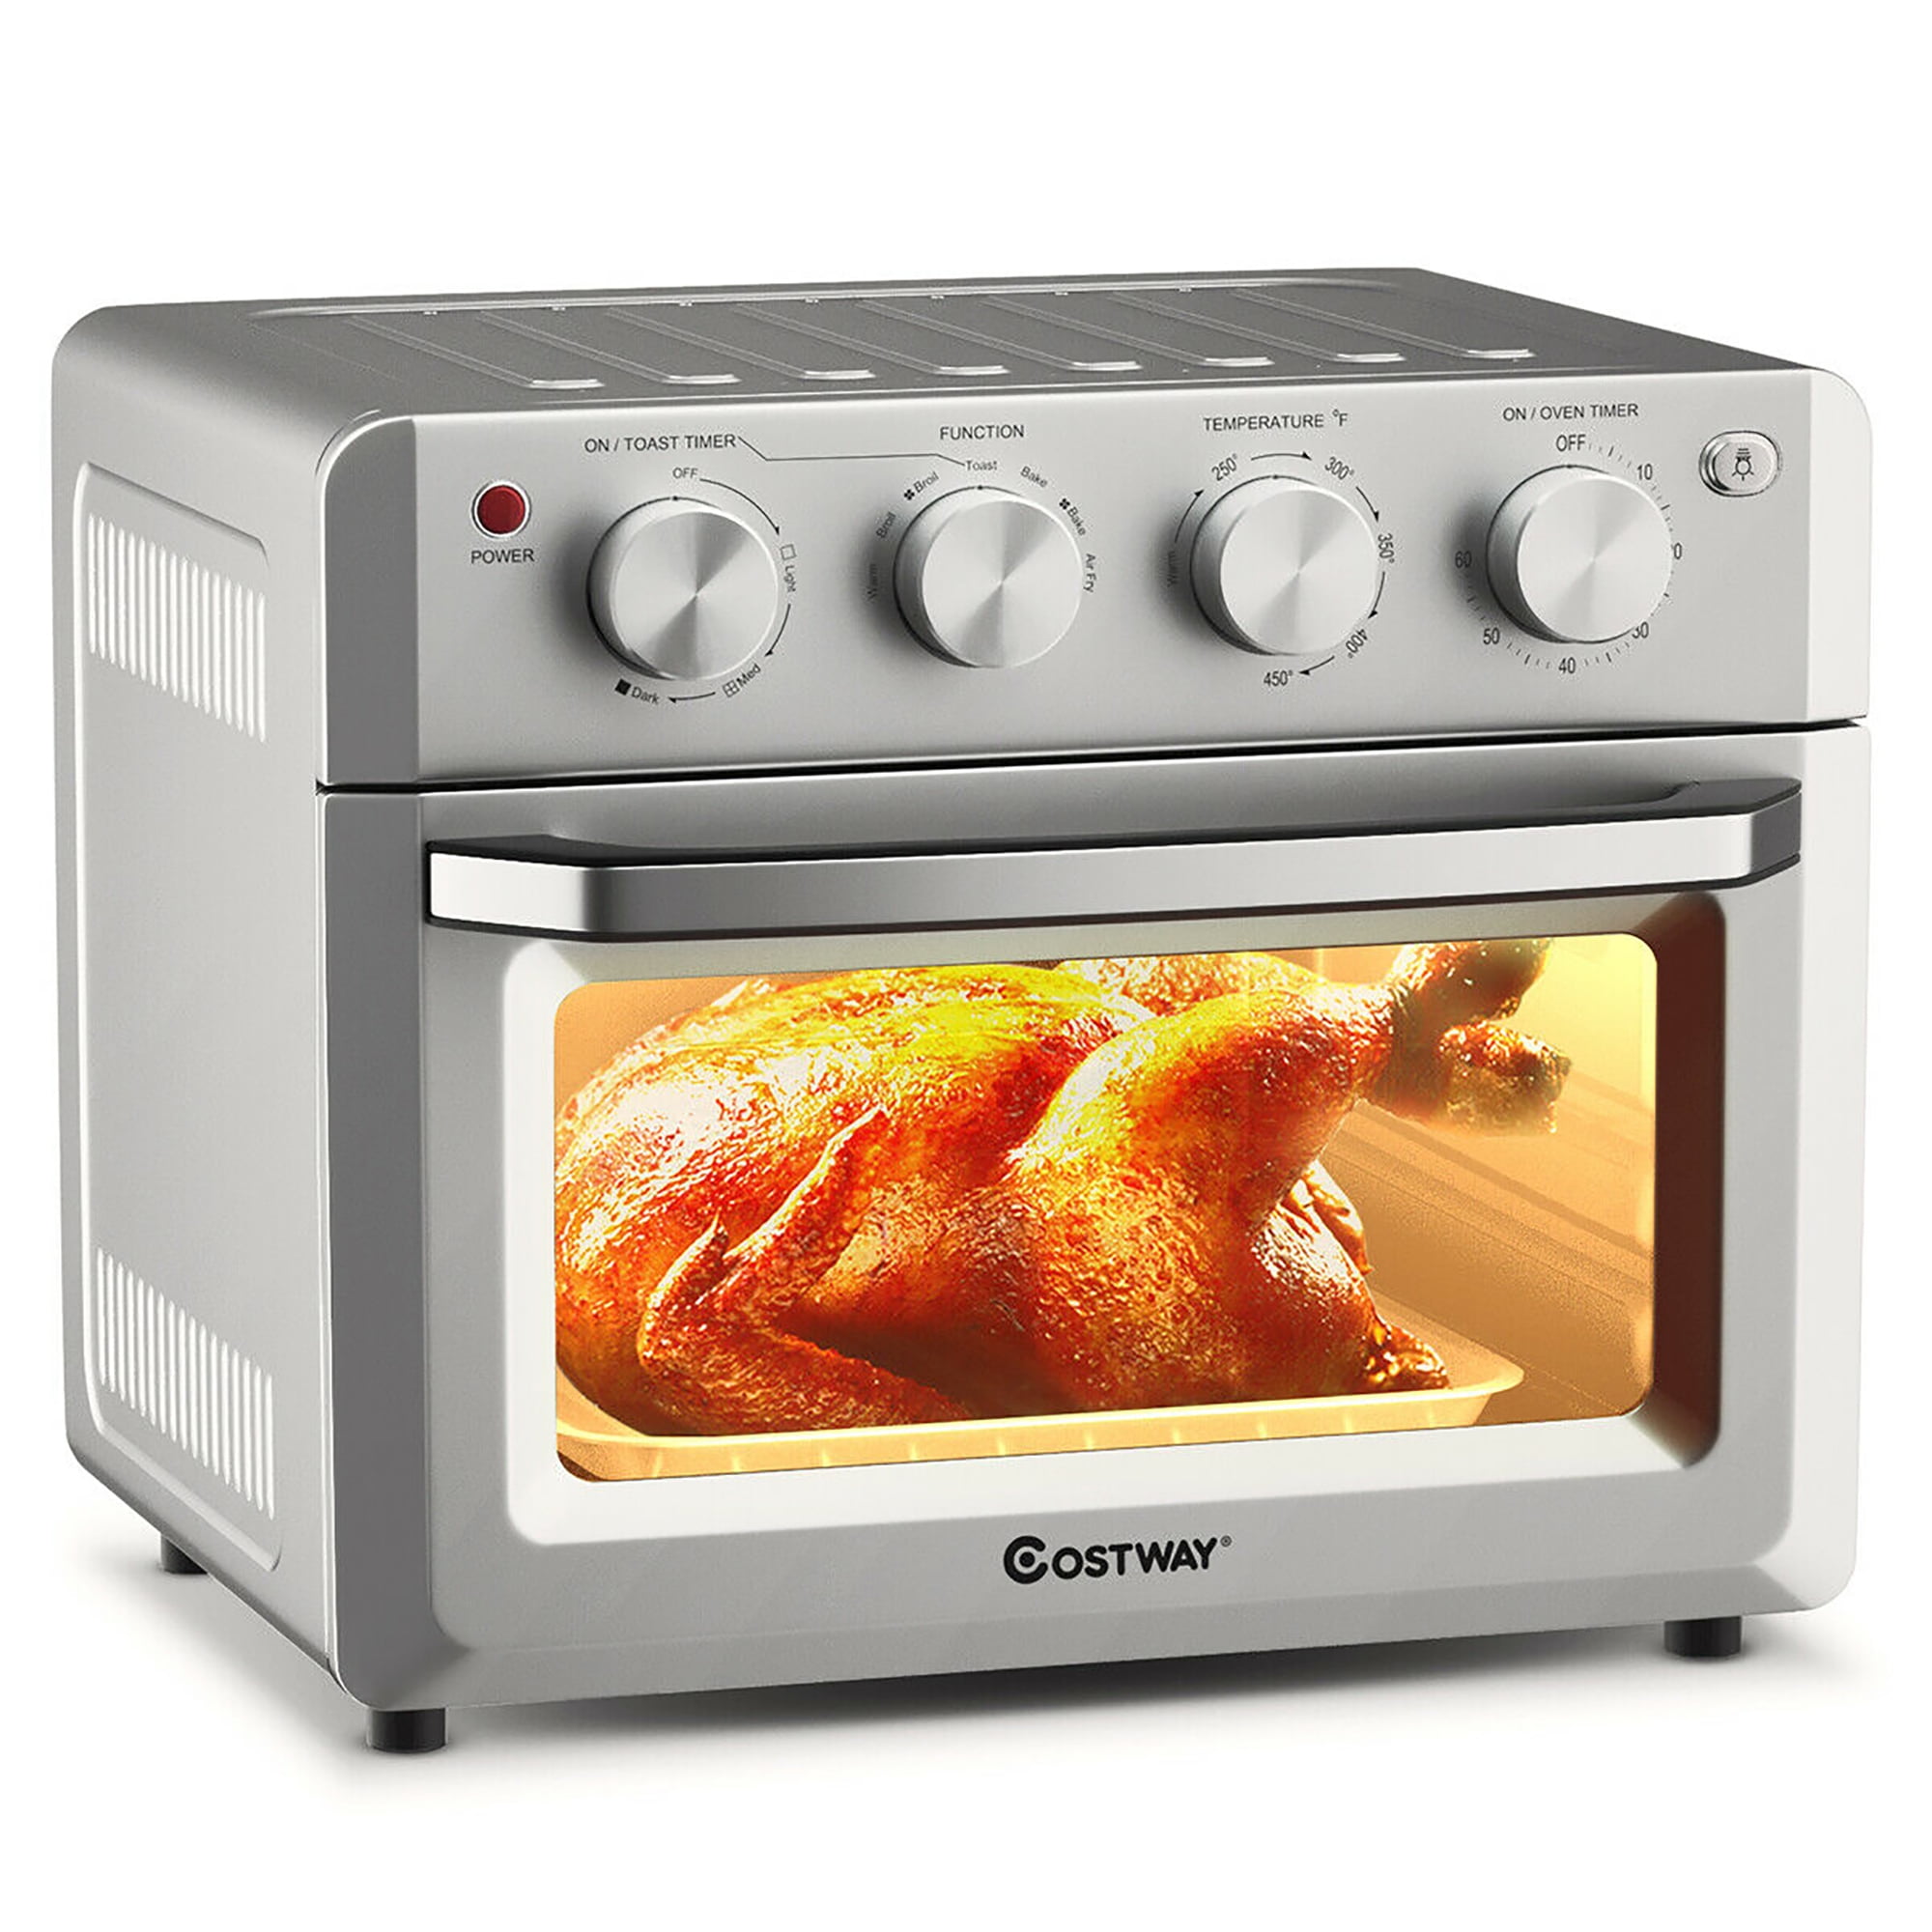 6 in 1 Air Fryer Oven Online - EPEIOS